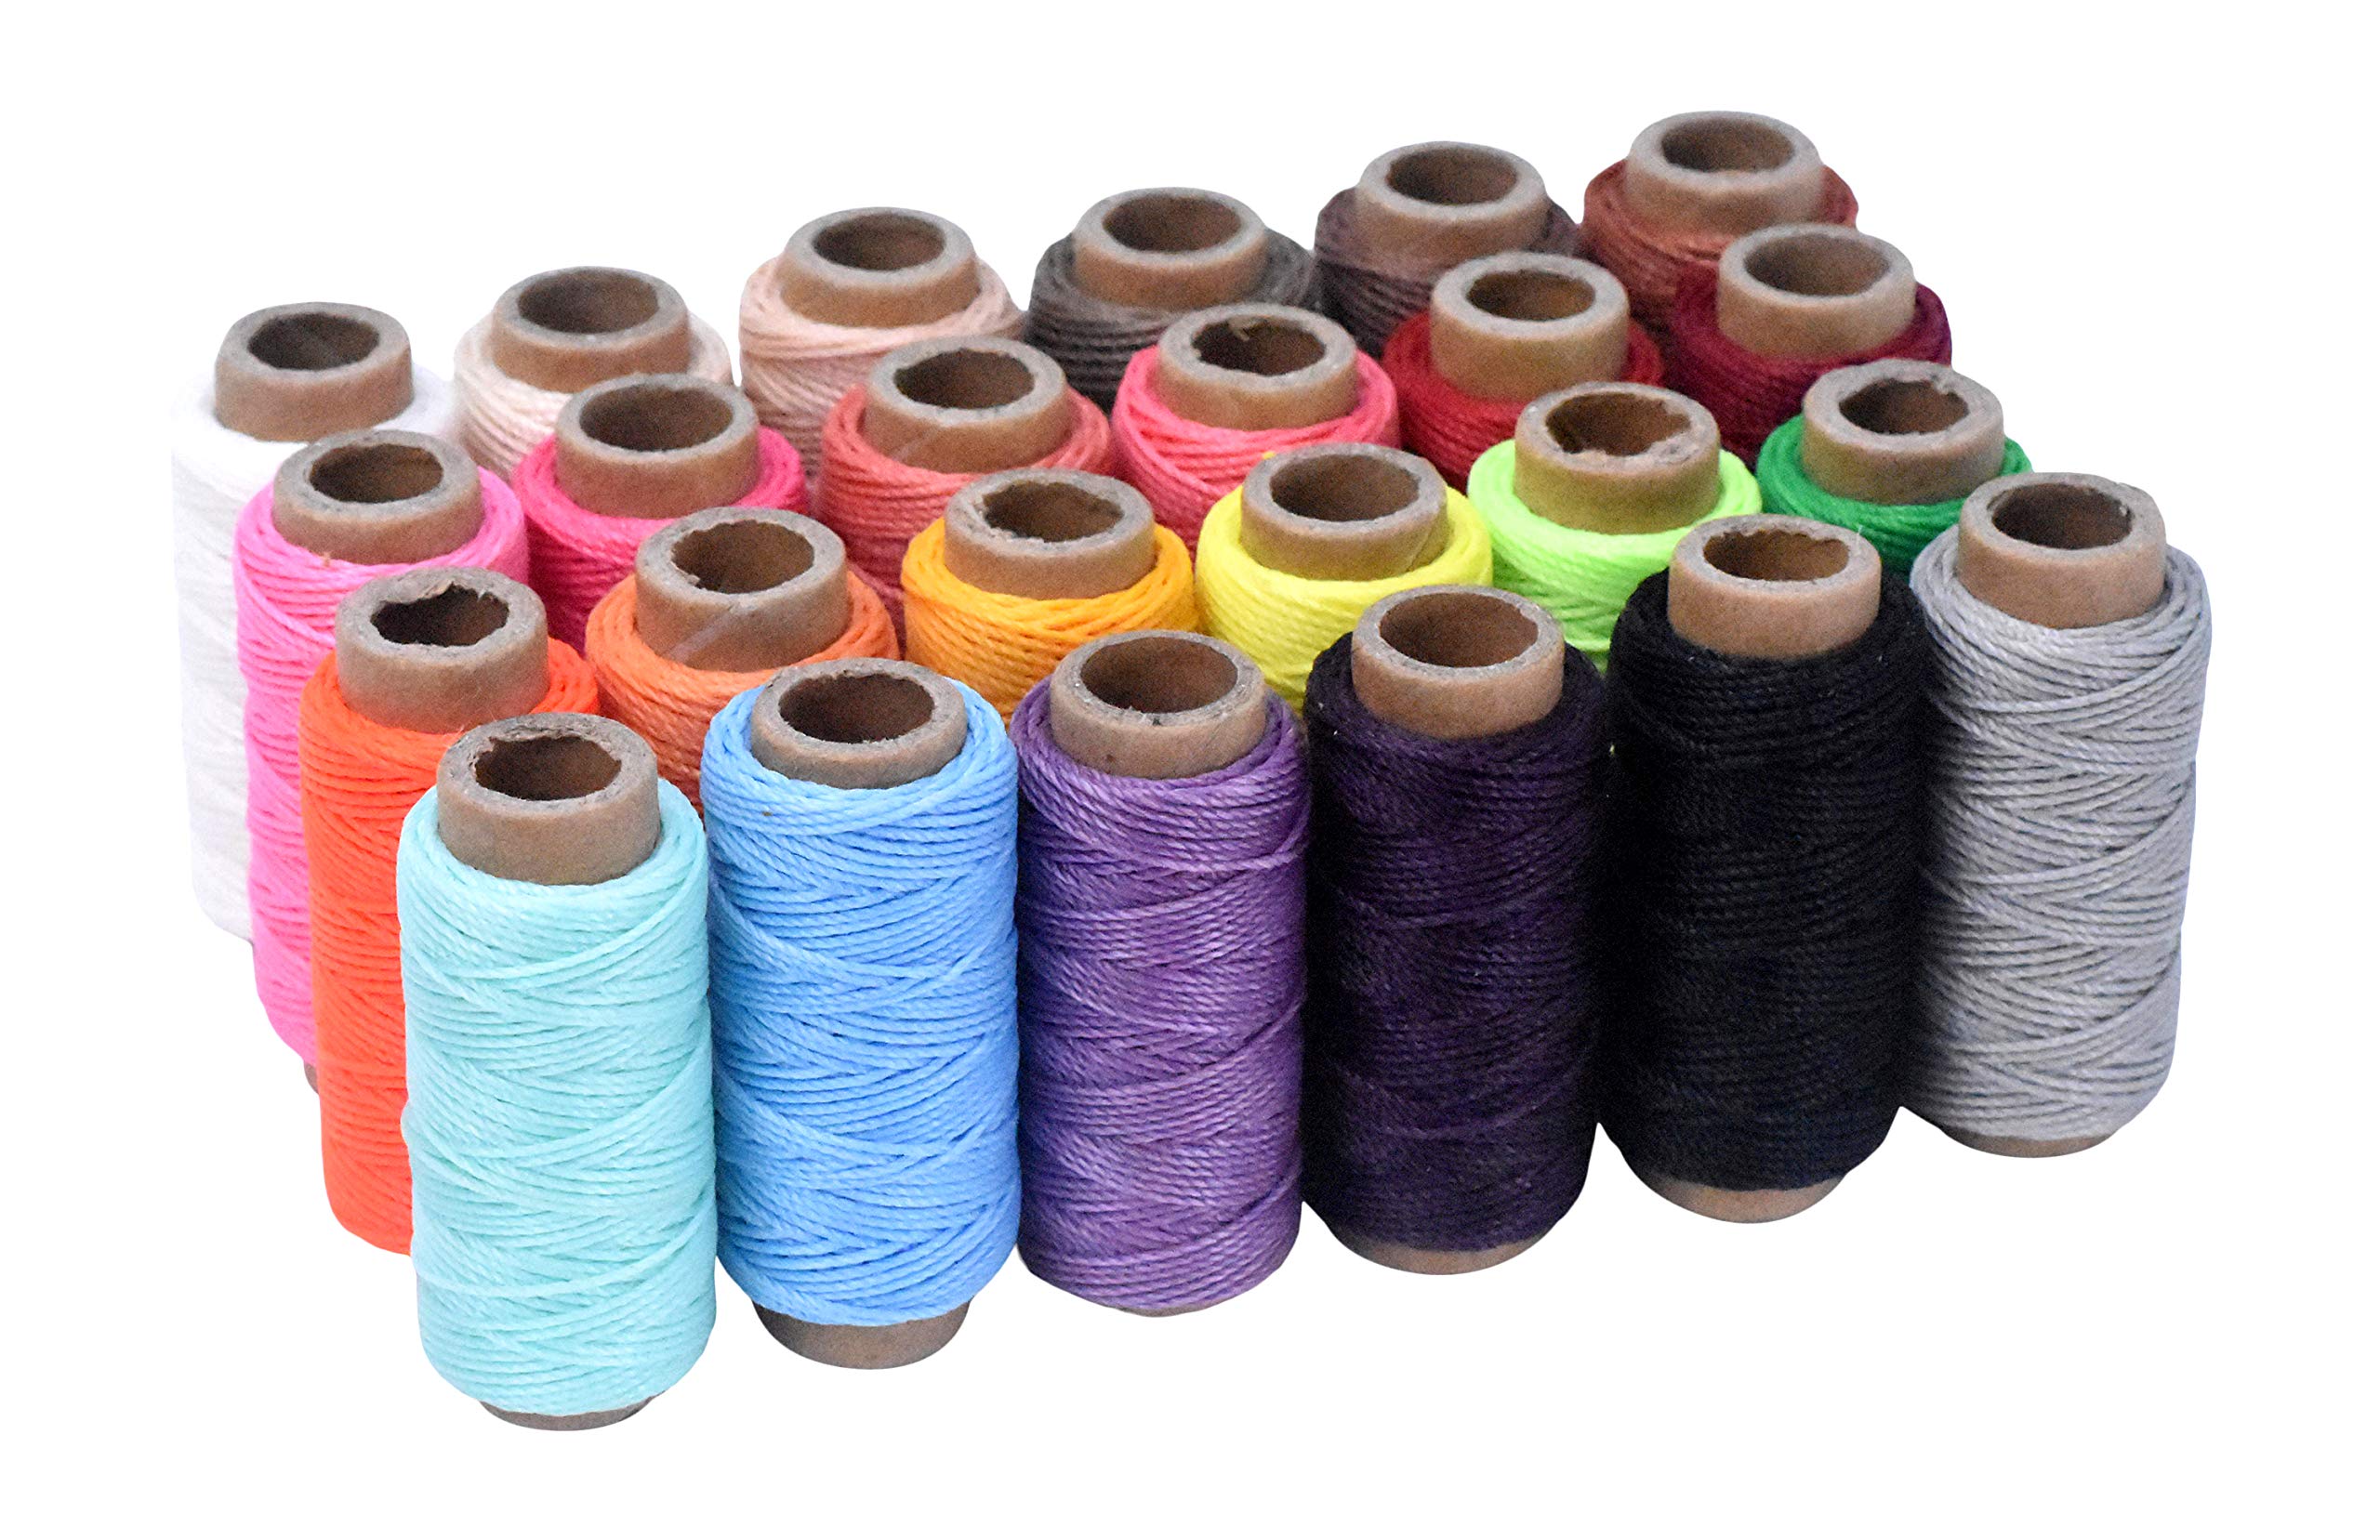 Mandala Crafts Round Waxed Thread for Leather Sewing - Leather Thread Wax  String Polyester cord for Leather craft Stitching Bookbinding by Mand